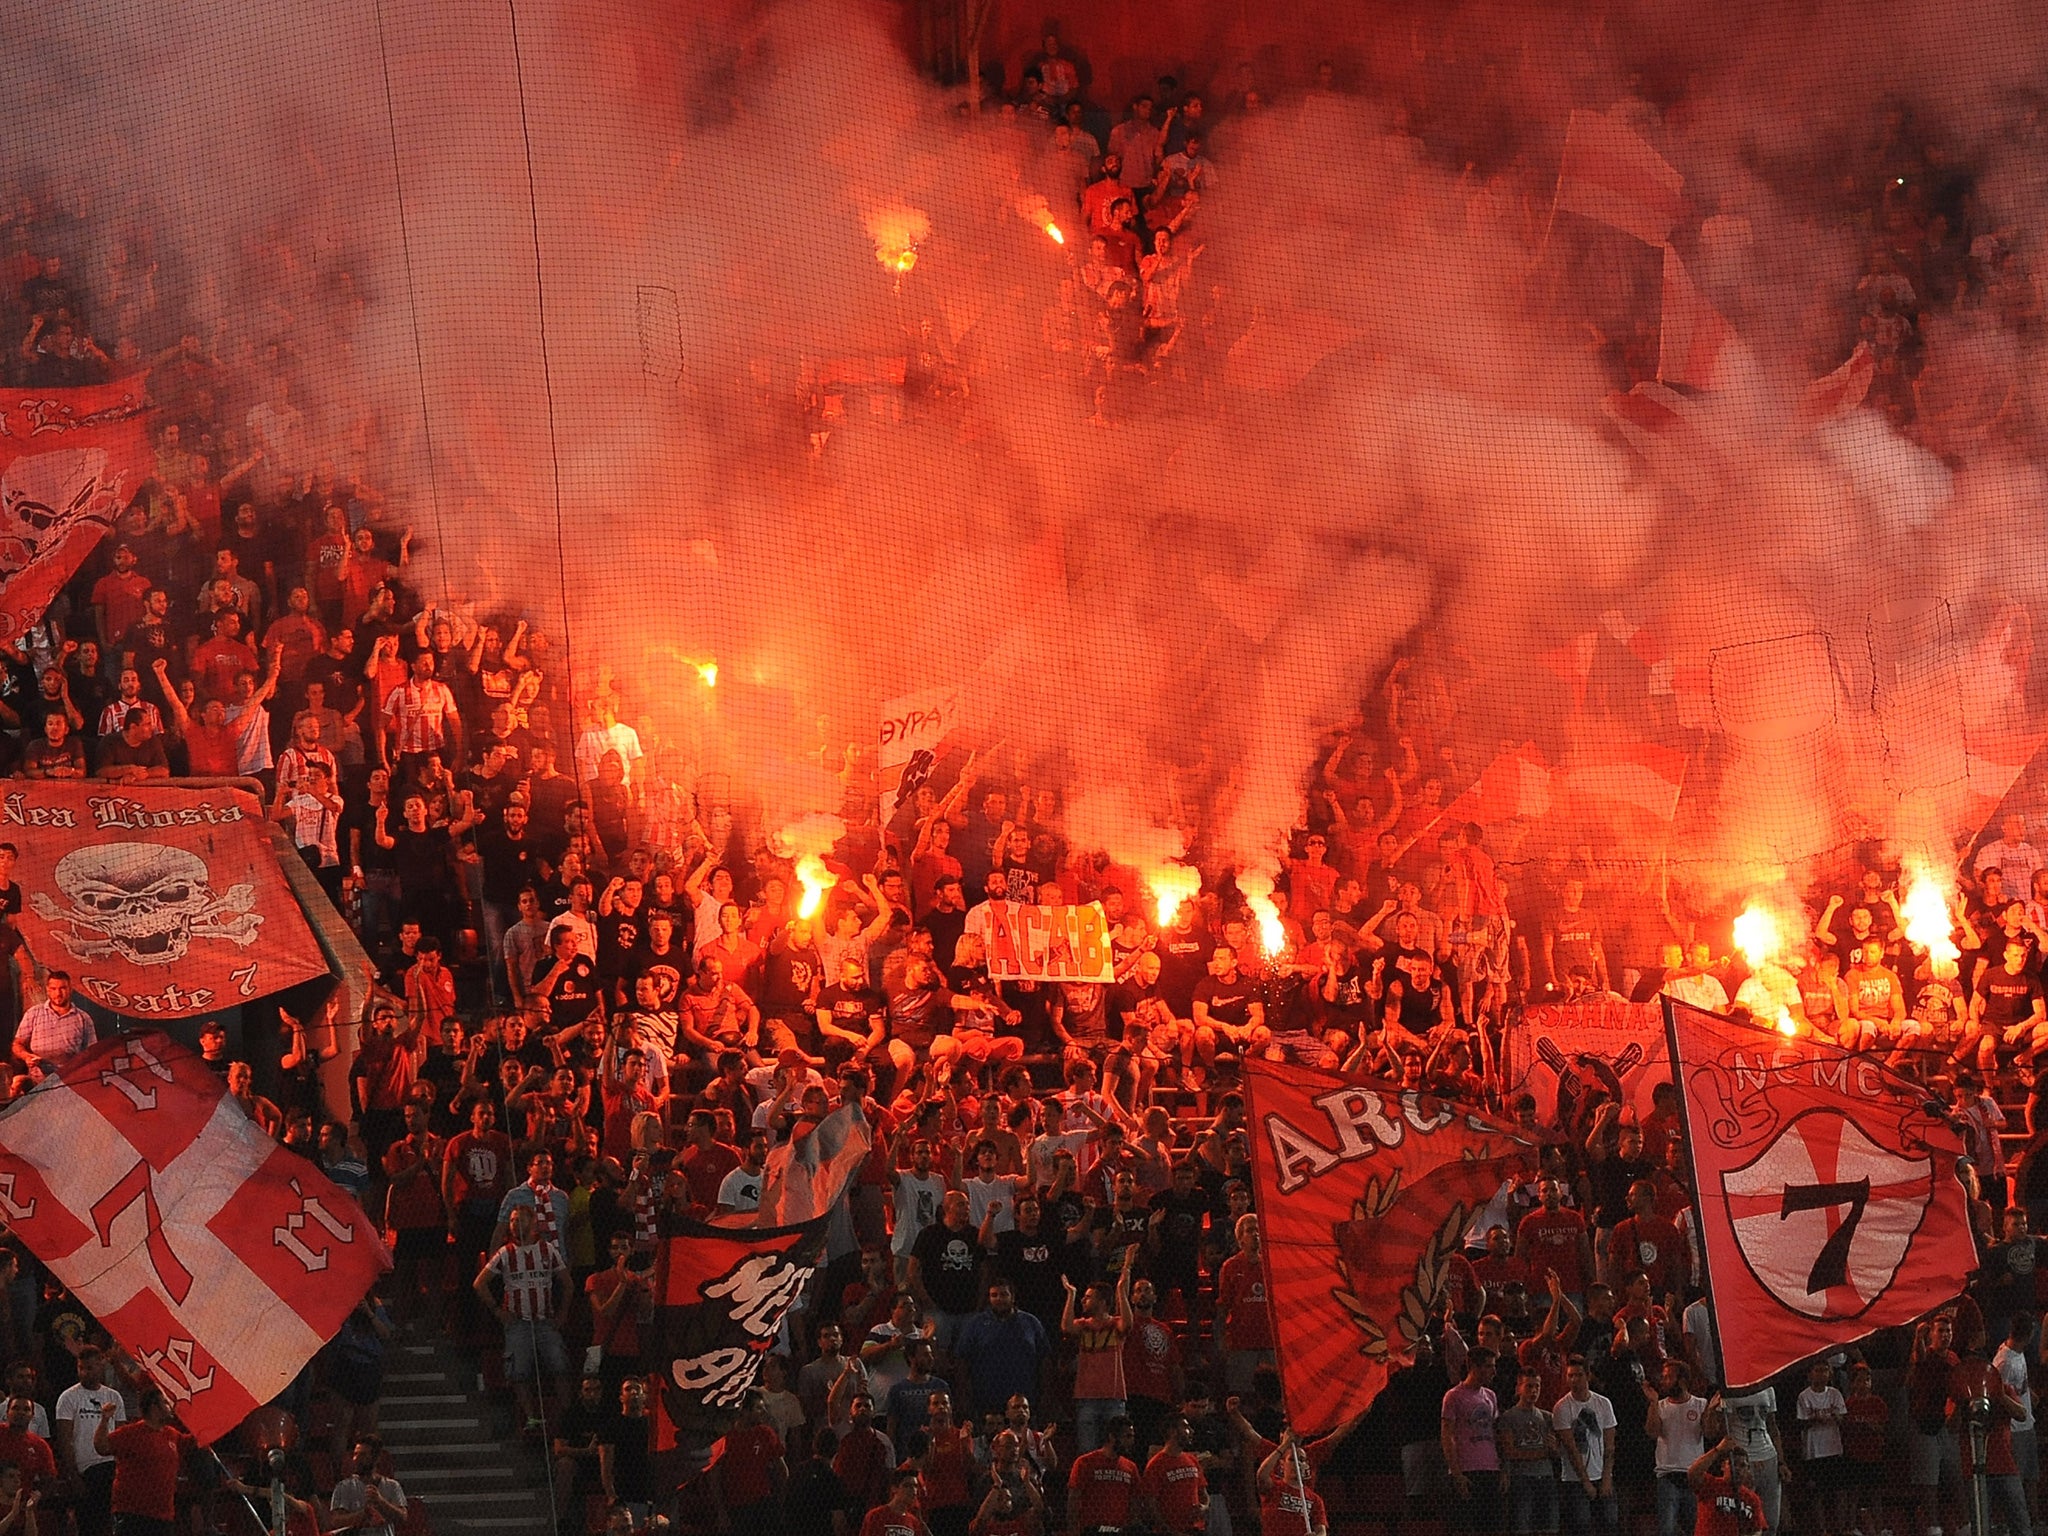 Olympiakos supporters with flares during a match against Atromitos in 2013